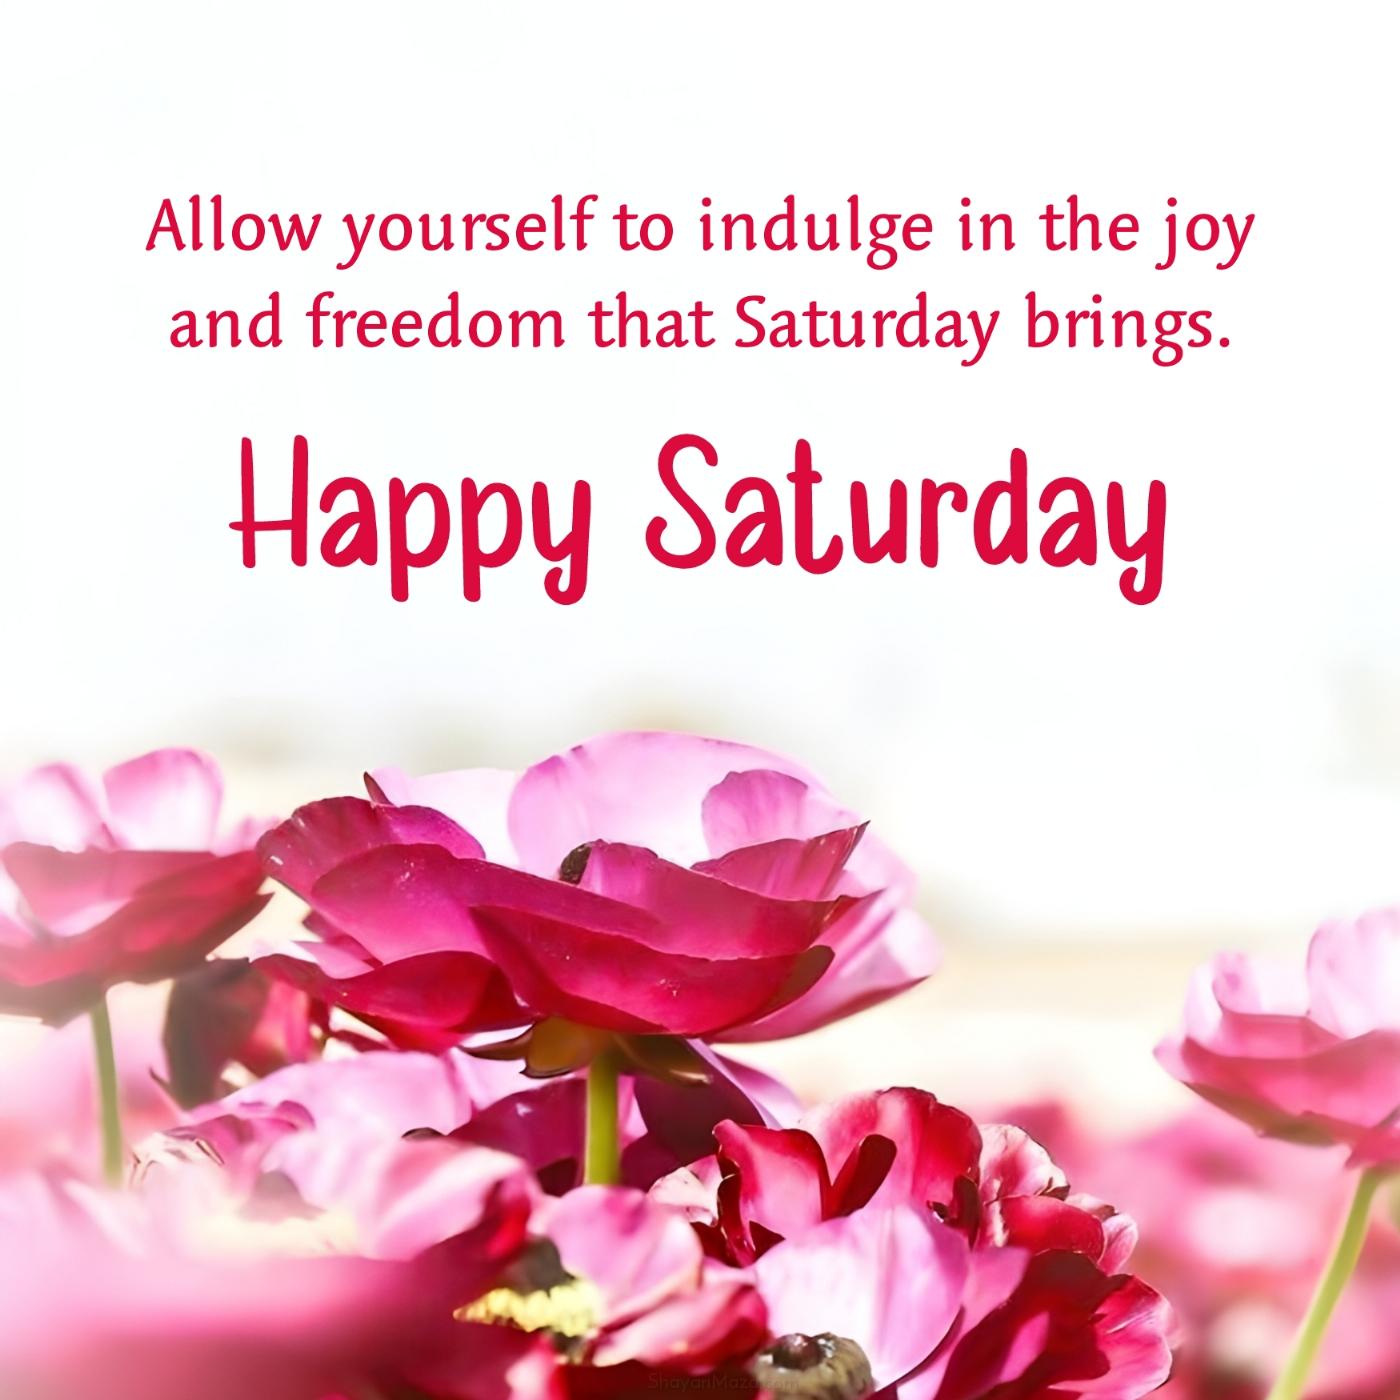 Allow yourself to indulge in the joy and freedom that Saturday brings